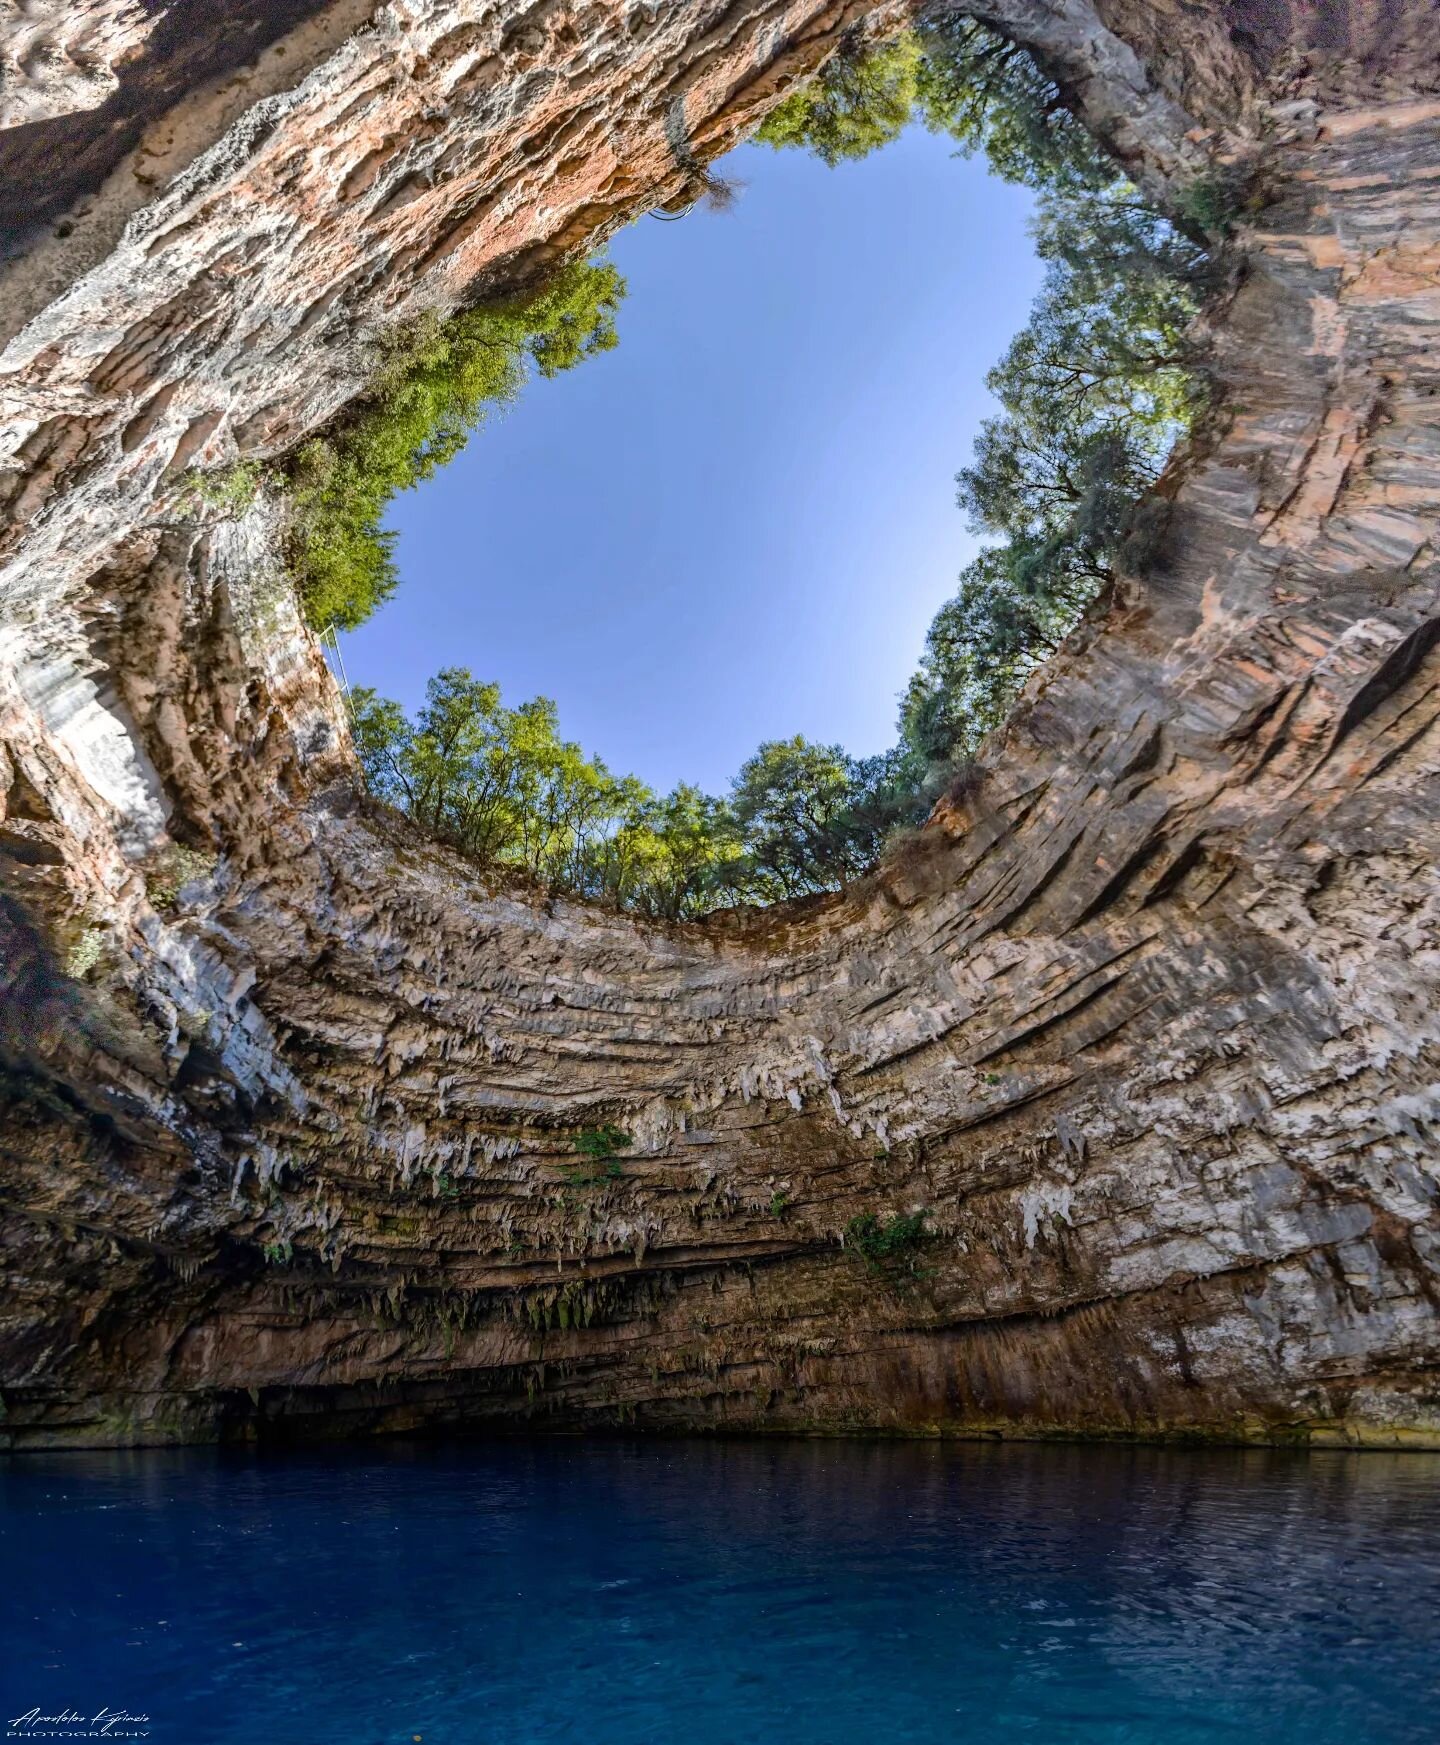 Melissani cave lake
A true surprise, a natural wonder, the Melissani cave lake is the outlet of a massive underground geological network of cracks that spans the entire island of Kefallonia, in Western Greece. 
The Melissani cave has two distinct cha